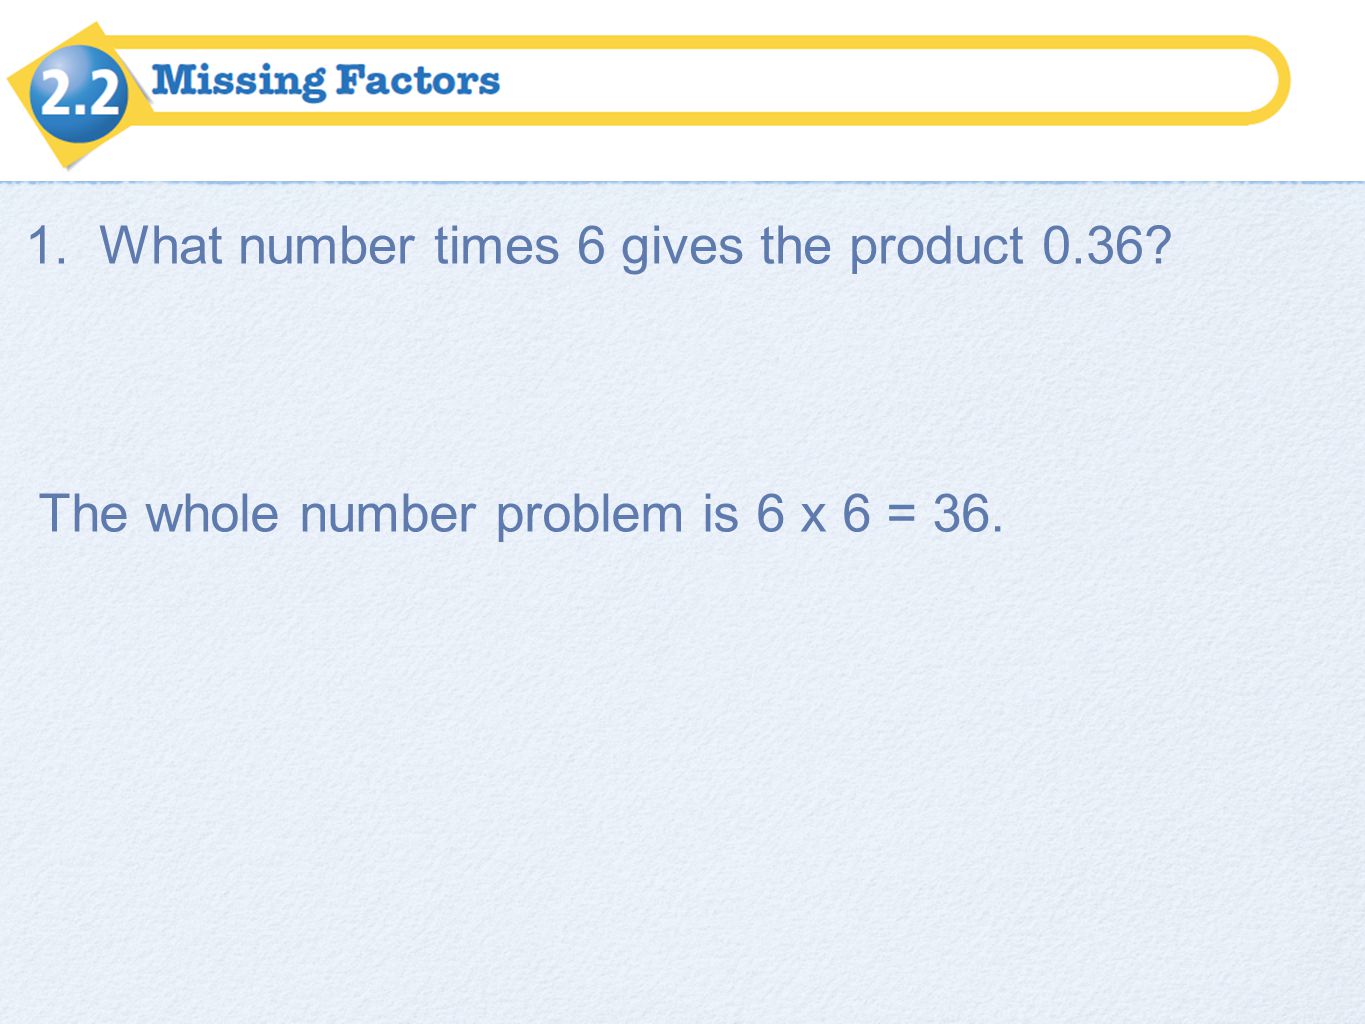 1. What number times 6 gives the product 0.36